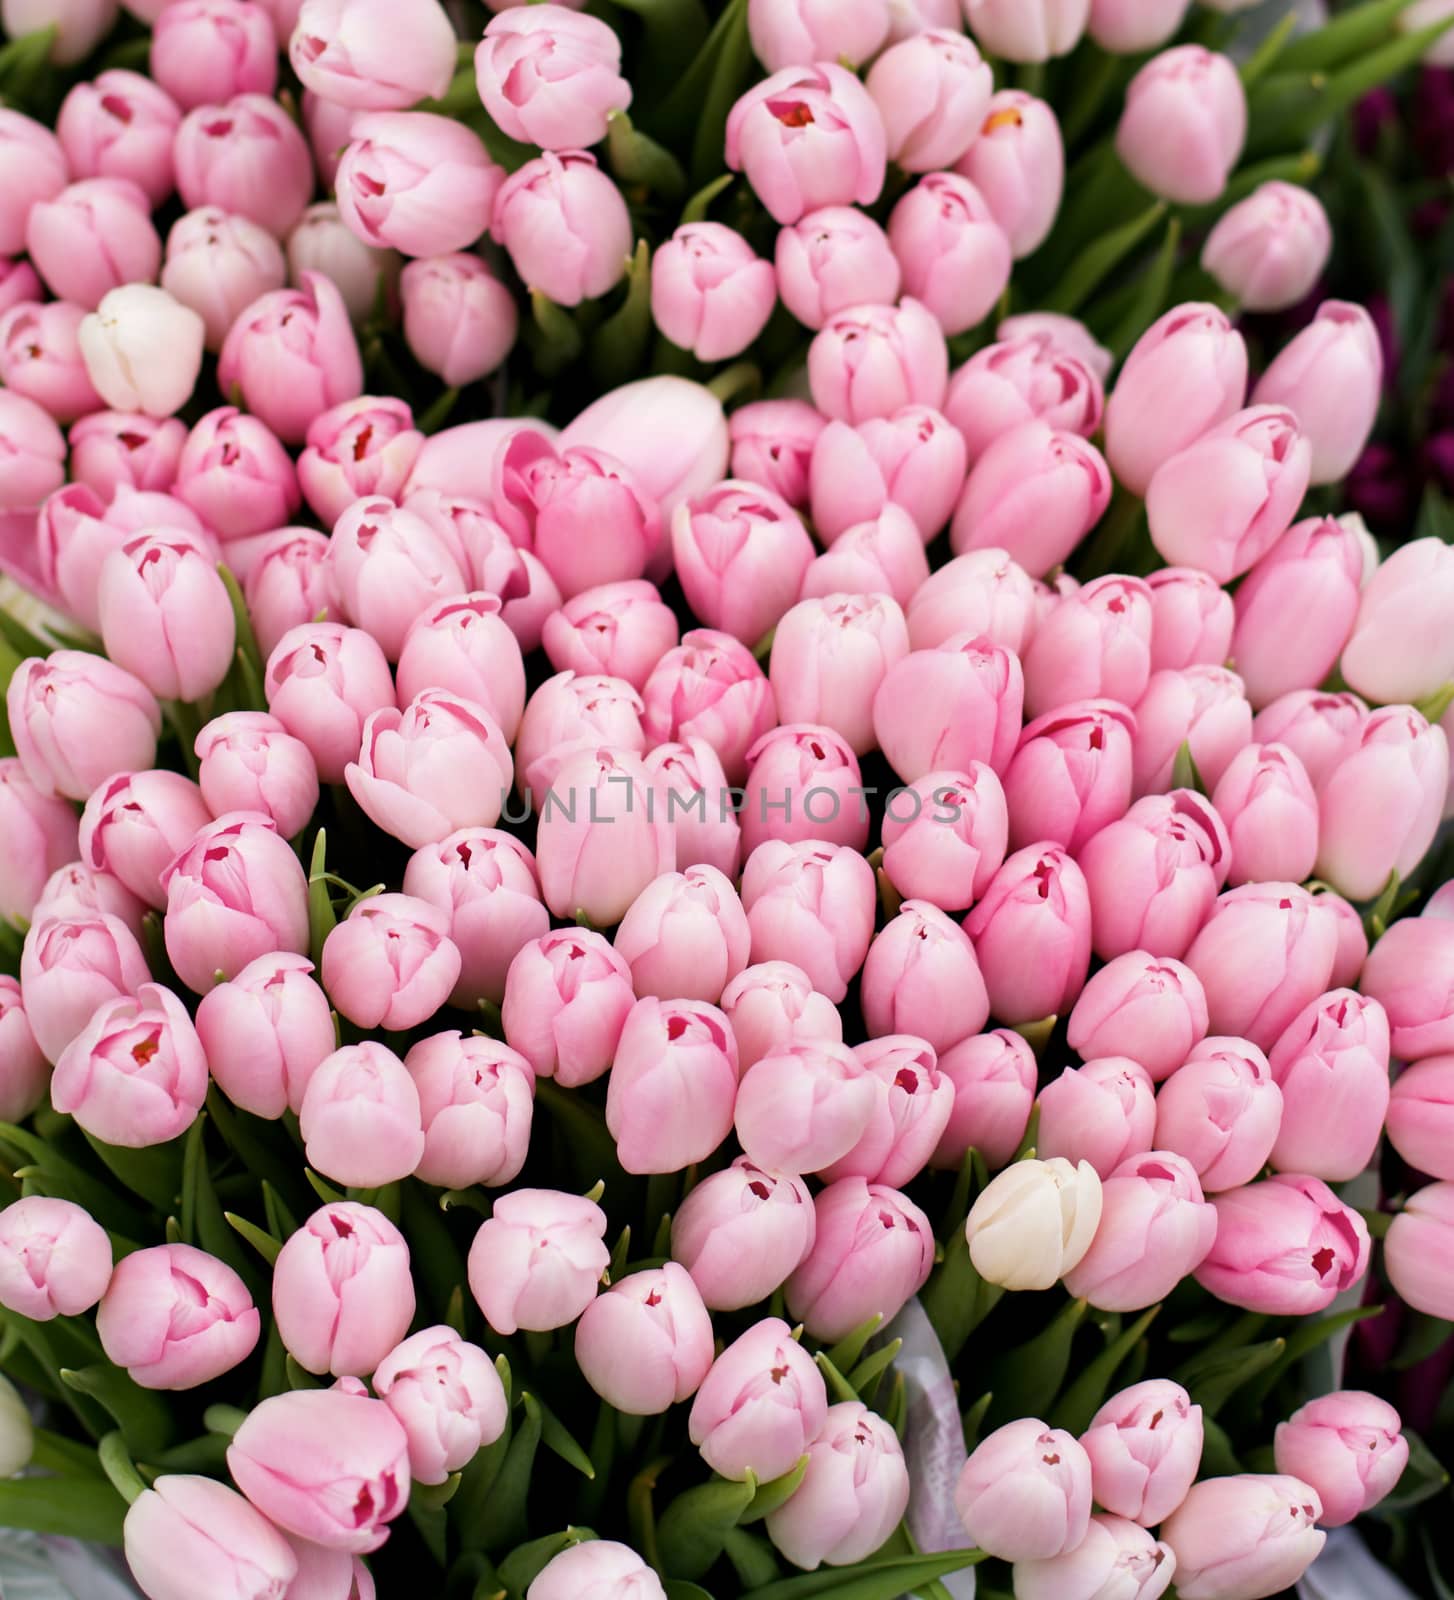 Beauty Pink Tulip Buds closeup as Background Outdoors. Selective Focus